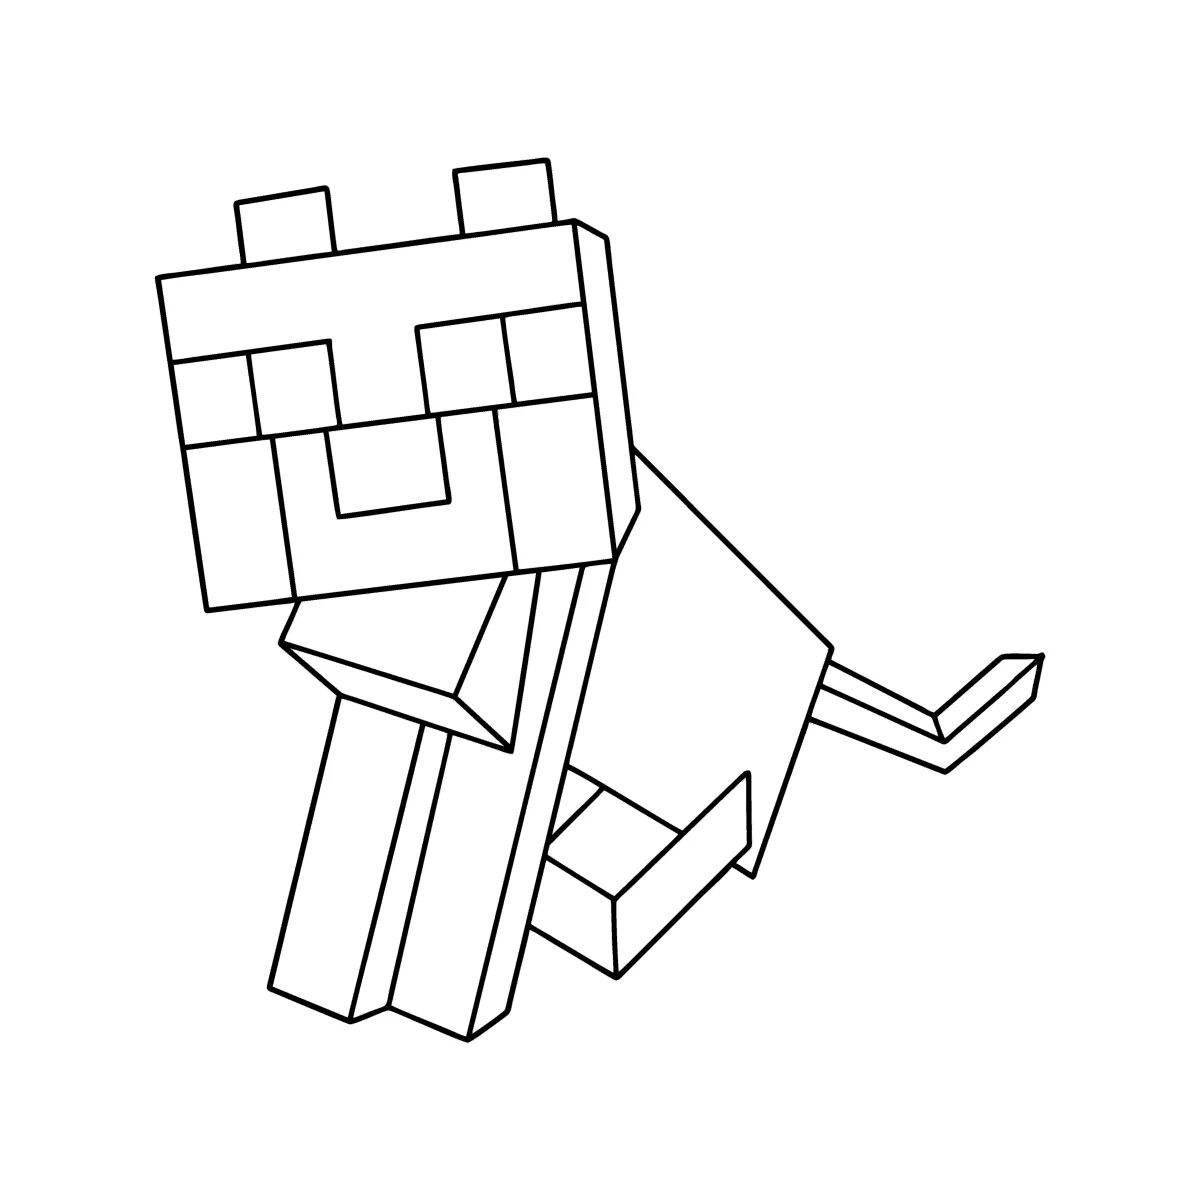 Fascinating minecraft animal coloring page